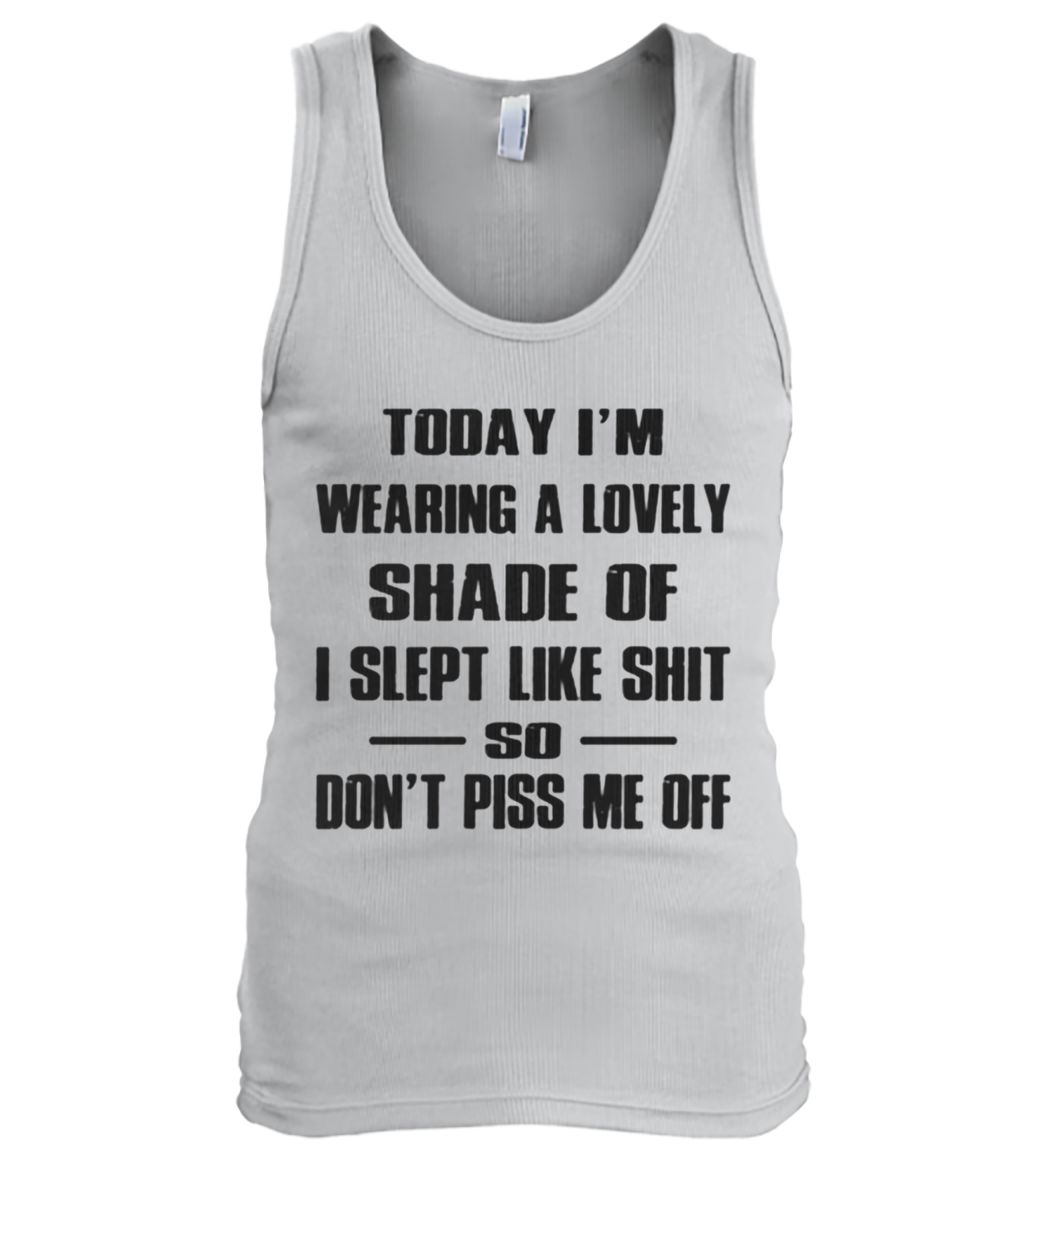 Today I'm wearing a lovely shade of I slept like shit so don't piss me off men's tank top